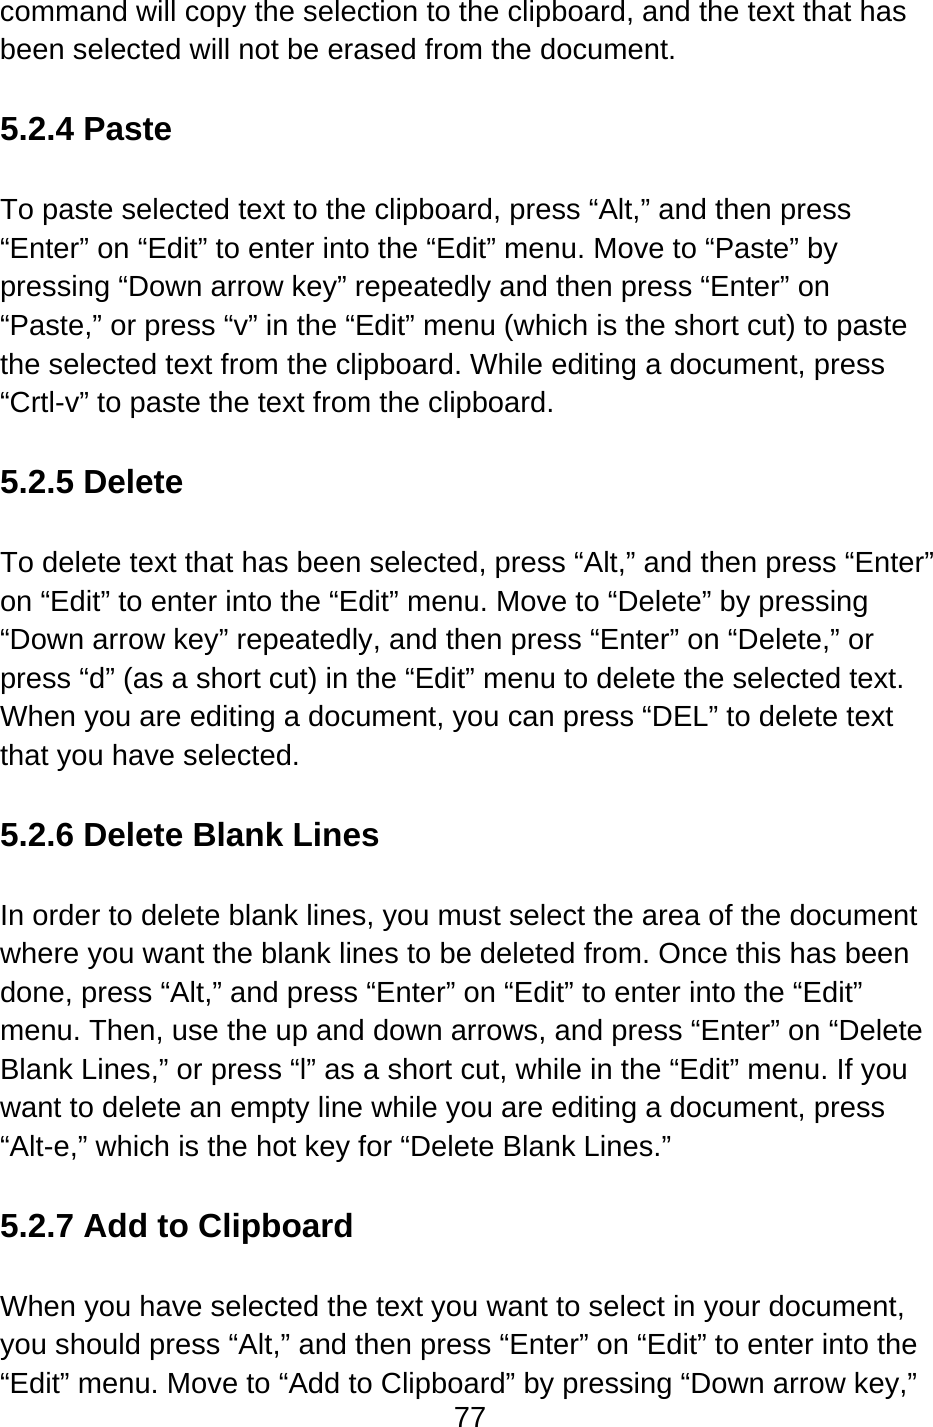 77  command will copy the selection to the clipboard, and the text that has been selected will not be erased from the document.  5.2.4 Paste  To paste selected text to the clipboard, press “Alt,” and then press “Enter” on “Edit” to enter into the “Edit” menu. Move to “Paste” by pressing “Down arrow key” repeatedly and then press “Enter” on “Paste,” or press “v” in the “Edit” menu (which is the short cut) to paste the selected text from the clipboard. While editing a document, press “Crtl-v” to paste the text from the clipboard.  5.2.5 Delete  To delete text that has been selected, press “Alt,” and then press “Enter” on “Edit” to enter into the “Edit” menu. Move to “Delete” by pressing “Down arrow key” repeatedly, and then press “Enter” on “Delete,” or press “d” (as a short cut) in the “Edit” menu to delete the selected text.  When you are editing a document, you can press “DEL” to delete text that you have selected.  5.2.6 Delete Blank Lines  In order to delete blank lines, you must select the area of the document where you want the blank lines to be deleted from. Once this has been done, press “Alt,” and press “Enter” on “Edit” to enter into the “Edit” menu. Then, use the up and down arrows, and press “Enter” on “Delete Blank Lines,” or press “l” as a short cut, while in the “Edit” menu. If you want to delete an empty line while you are editing a document, press “Alt-e,” which is the hot key for “Delete Blank Lines.”  5.2.7 Add to Clipboard  When you have selected the text you want to select in your document, you should press “Alt,” and then press “Enter” on “Edit” to enter into the “Edit” menu. Move to “Add to Clipboard” by pressing “Down arrow key,” 